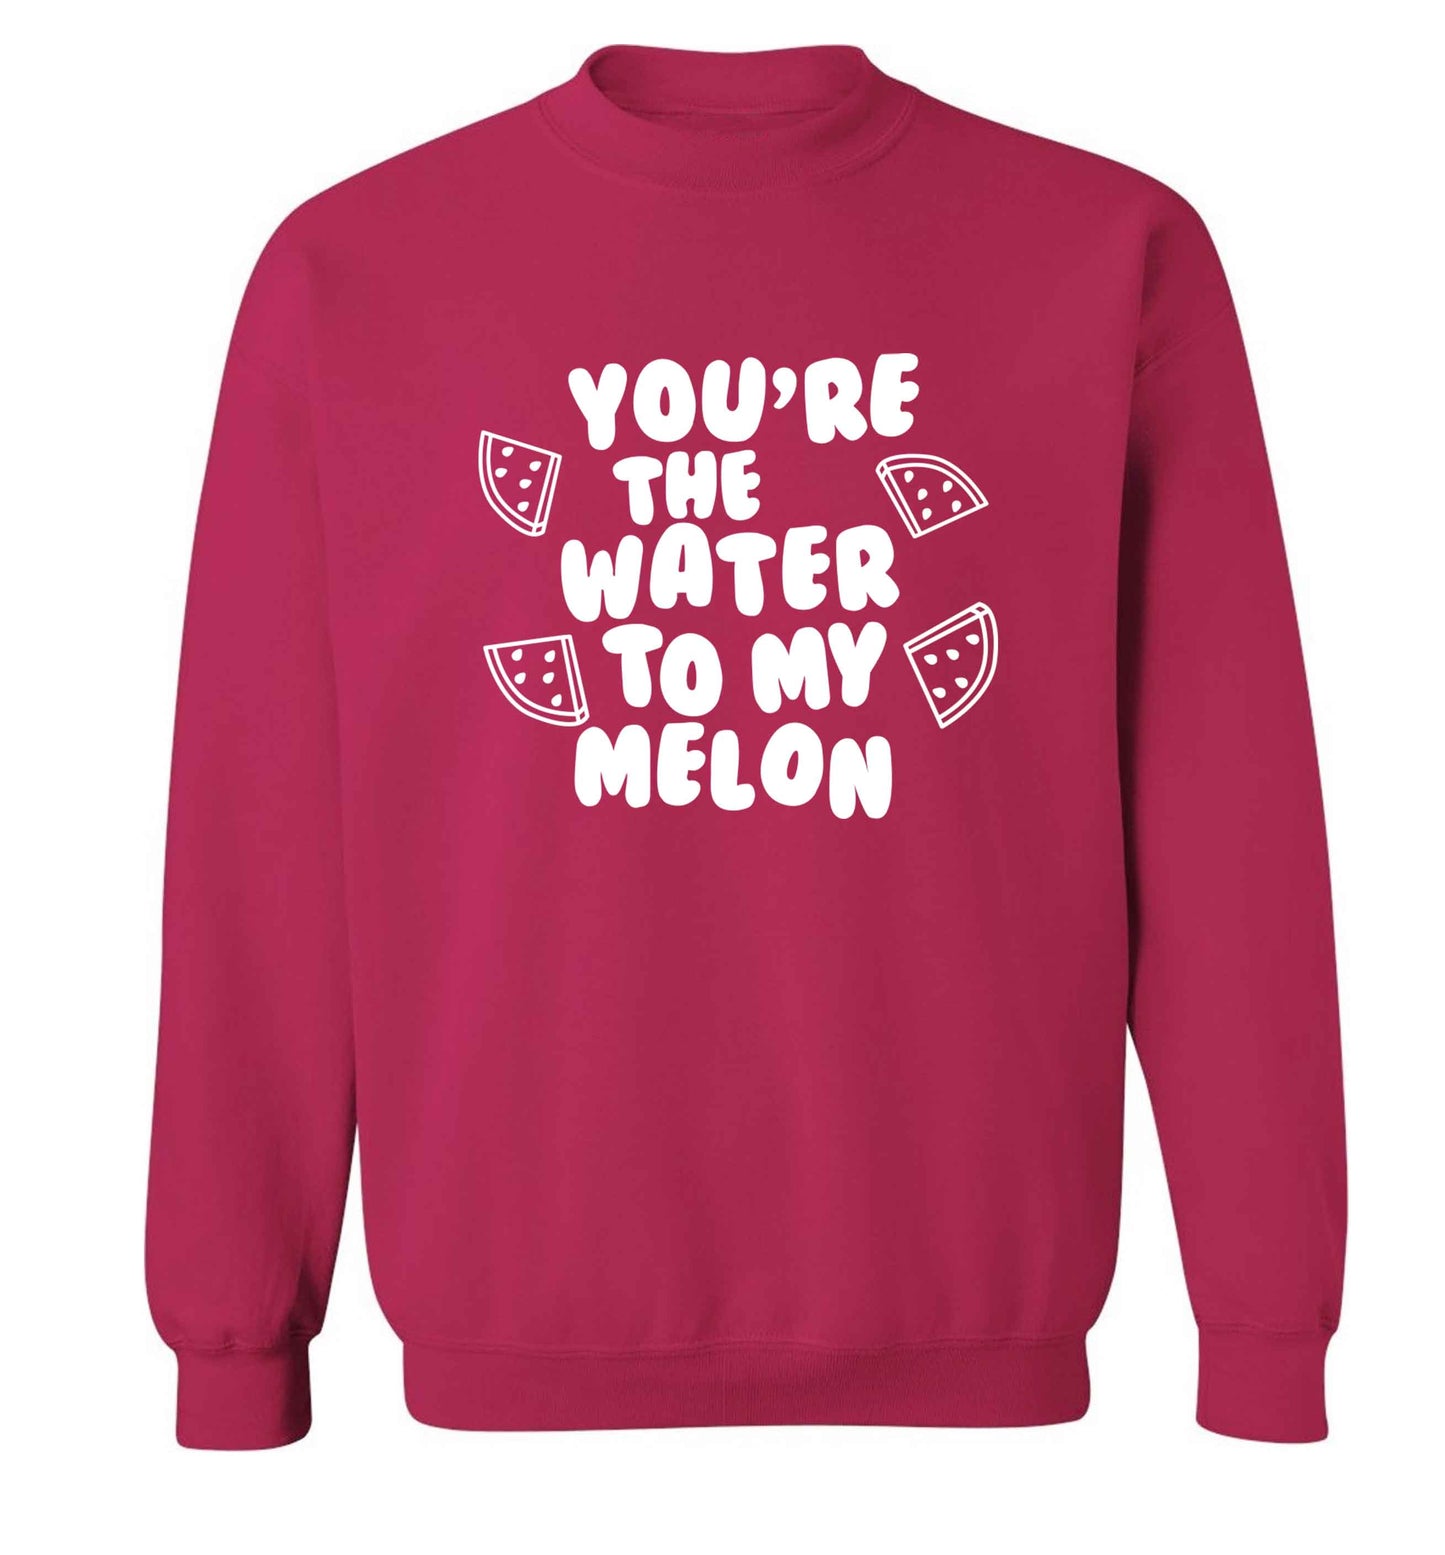 You're the water to my melon adult's unisex pink sweater 2XL